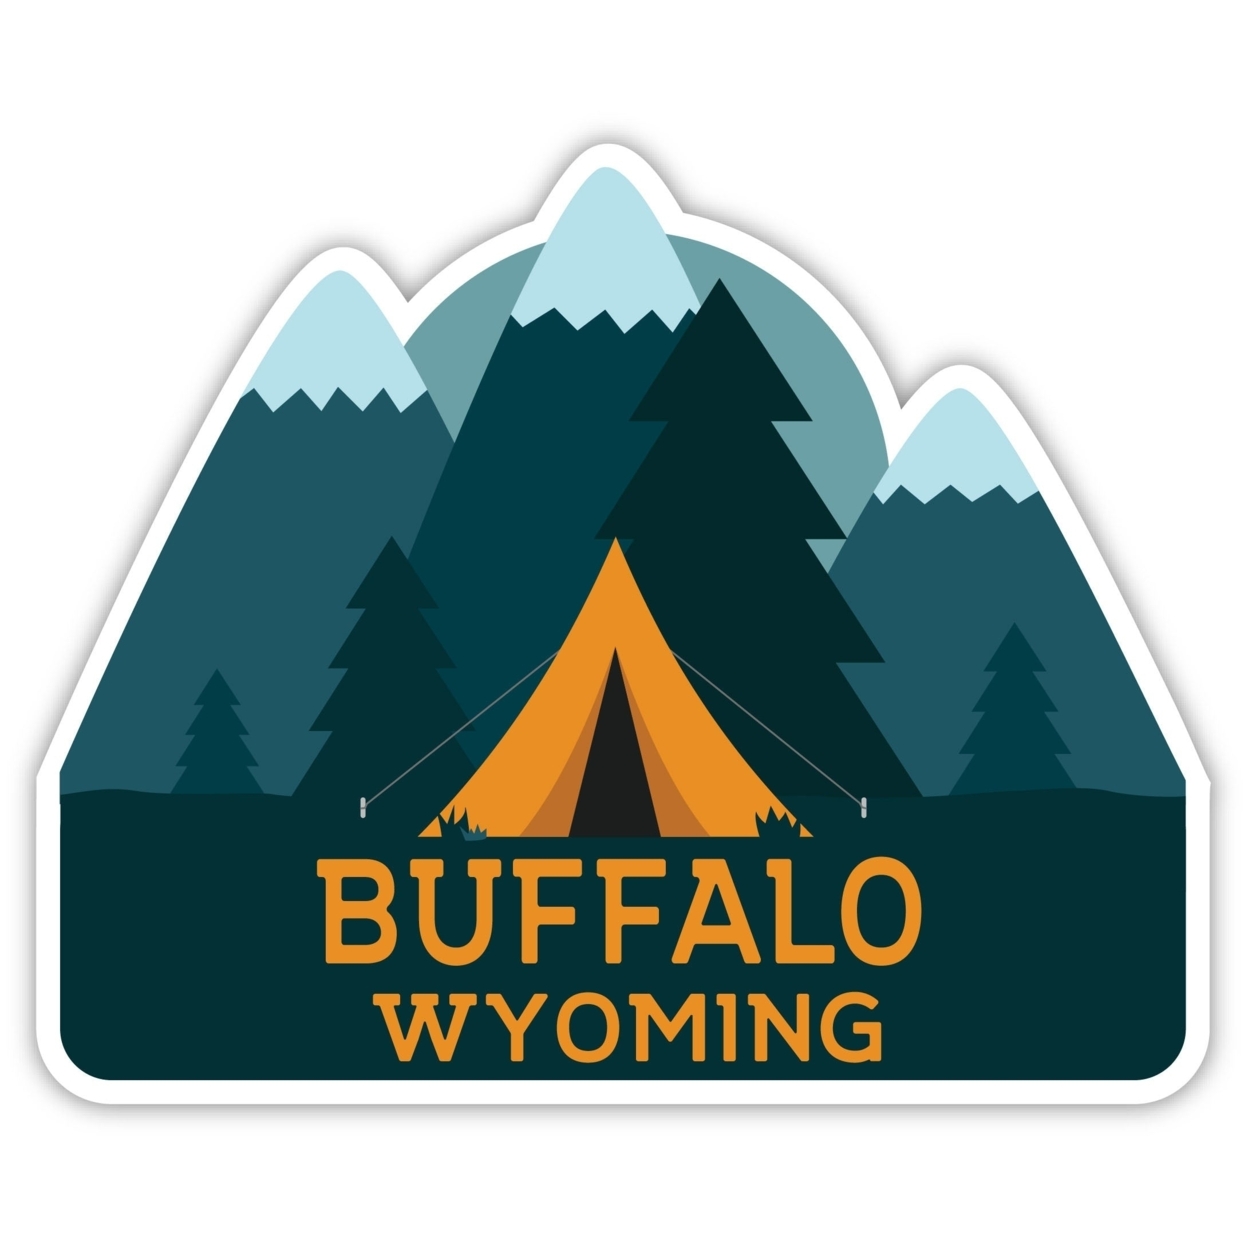 Buffalo Wyoming Souvenir Decorative Stickers (Choose Theme And Size) - 4-Pack, 2-Inch, Camp Life